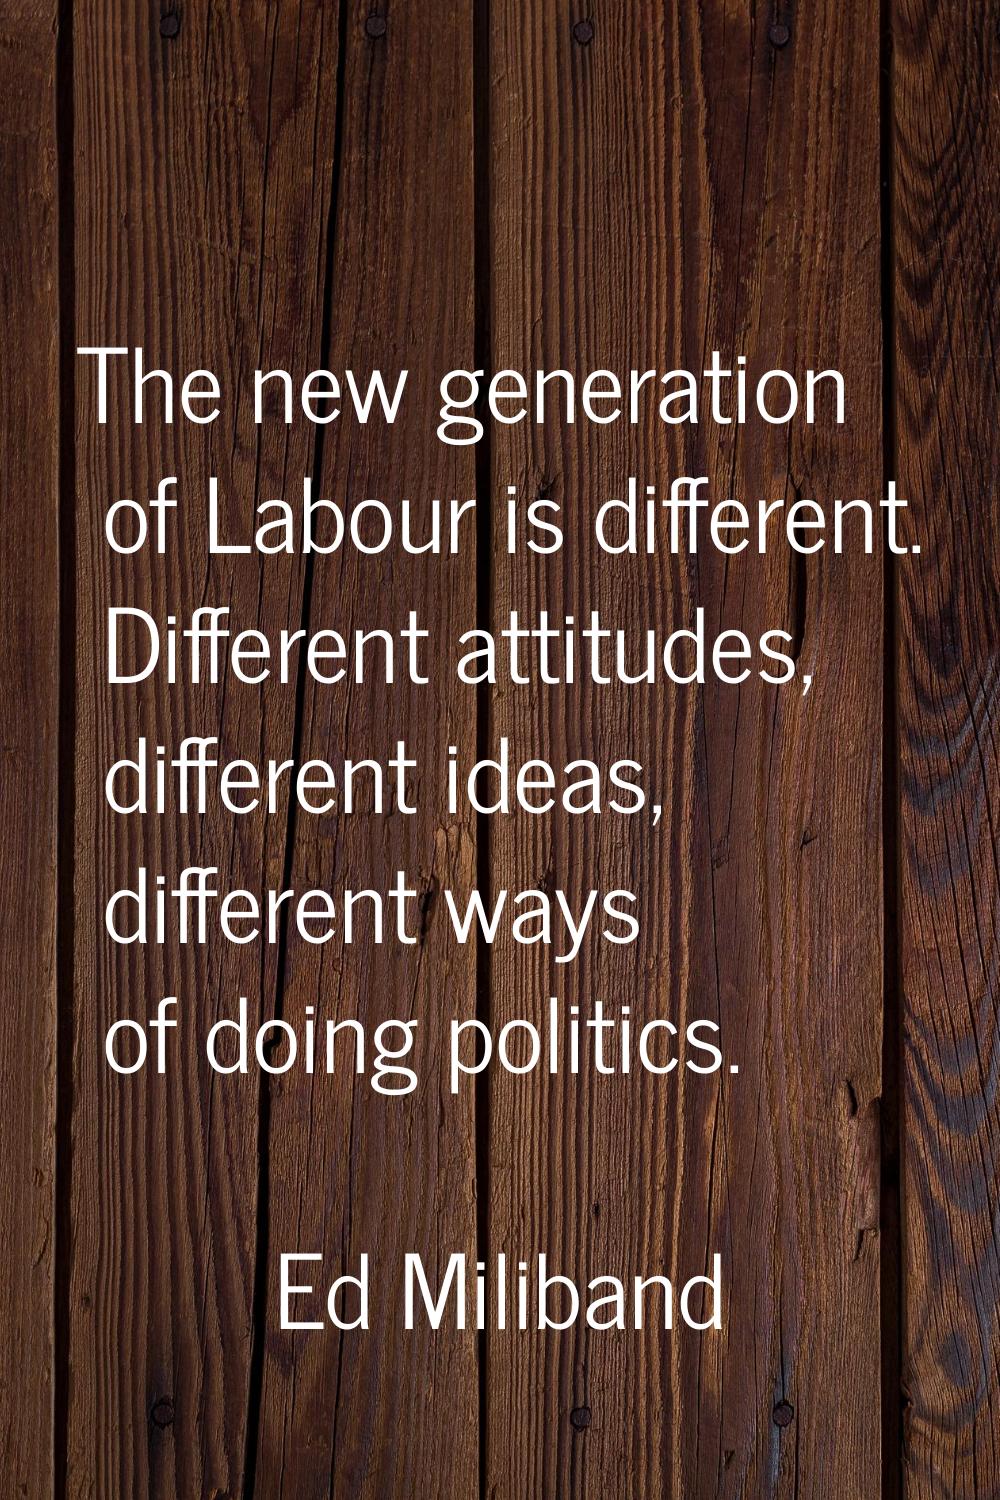 The new generation of Labour is different. Different attitudes, different ideas, different ways of 